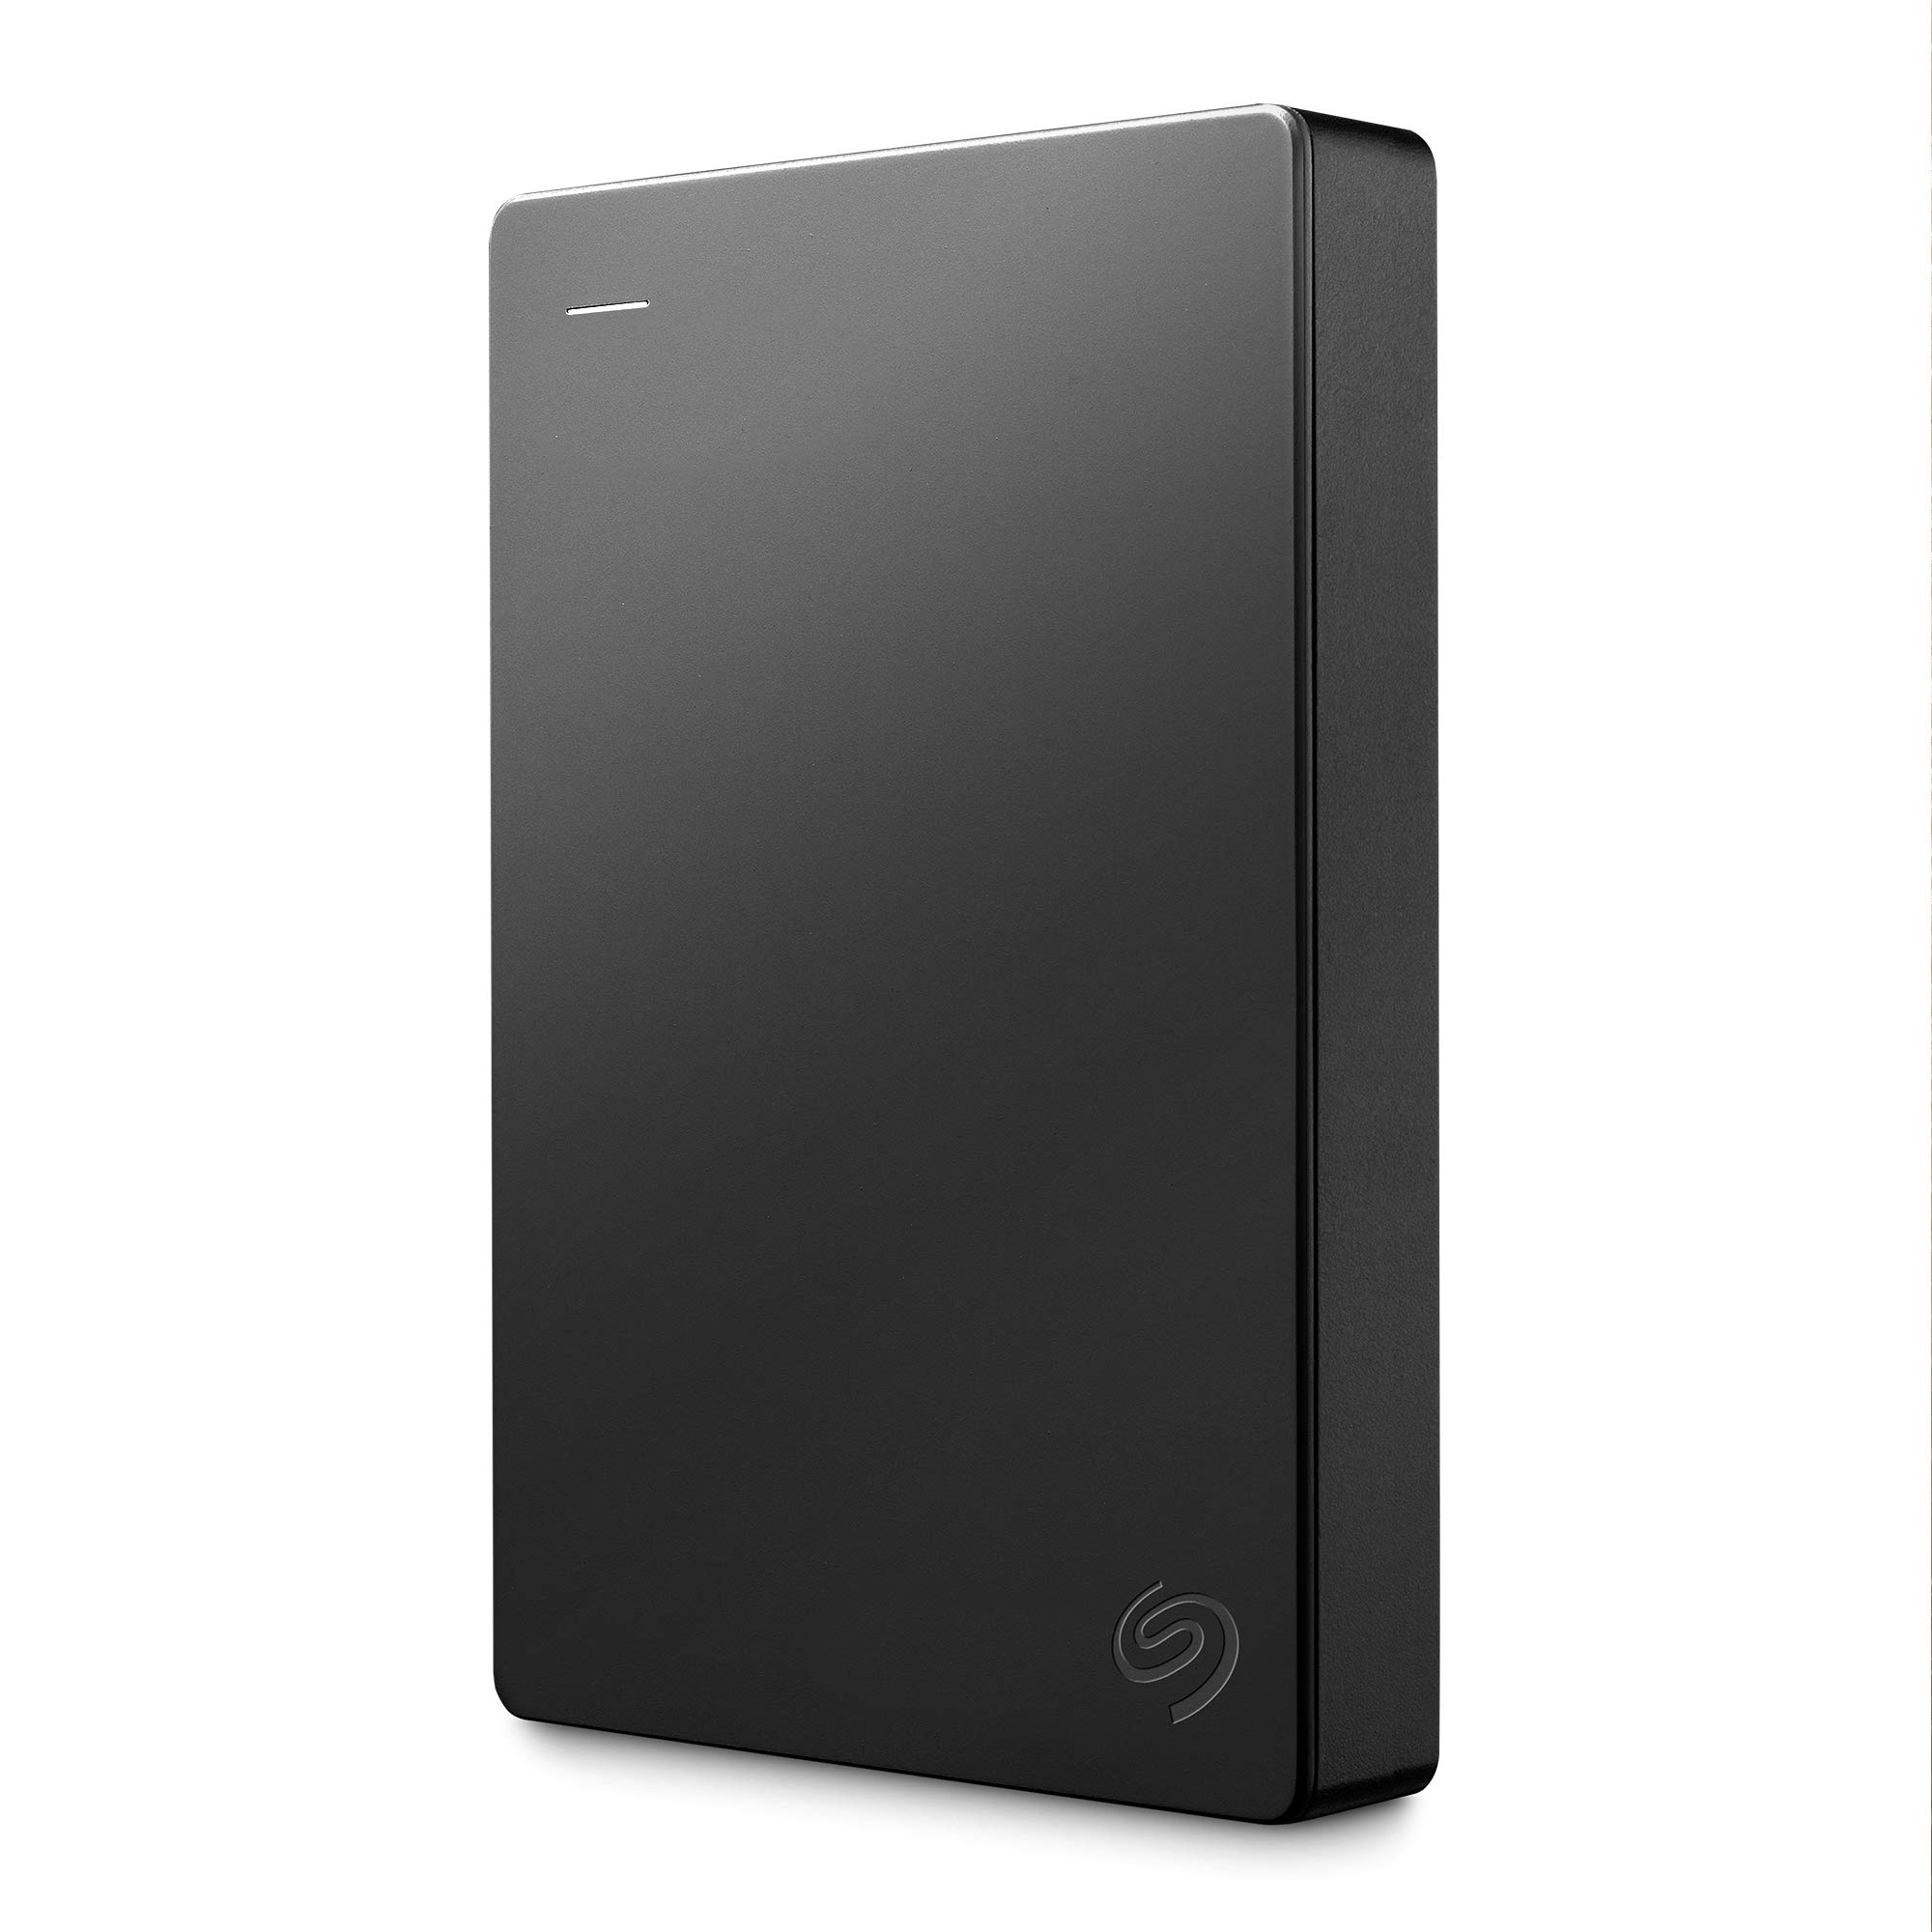 Seagate external hard drive with a question mark